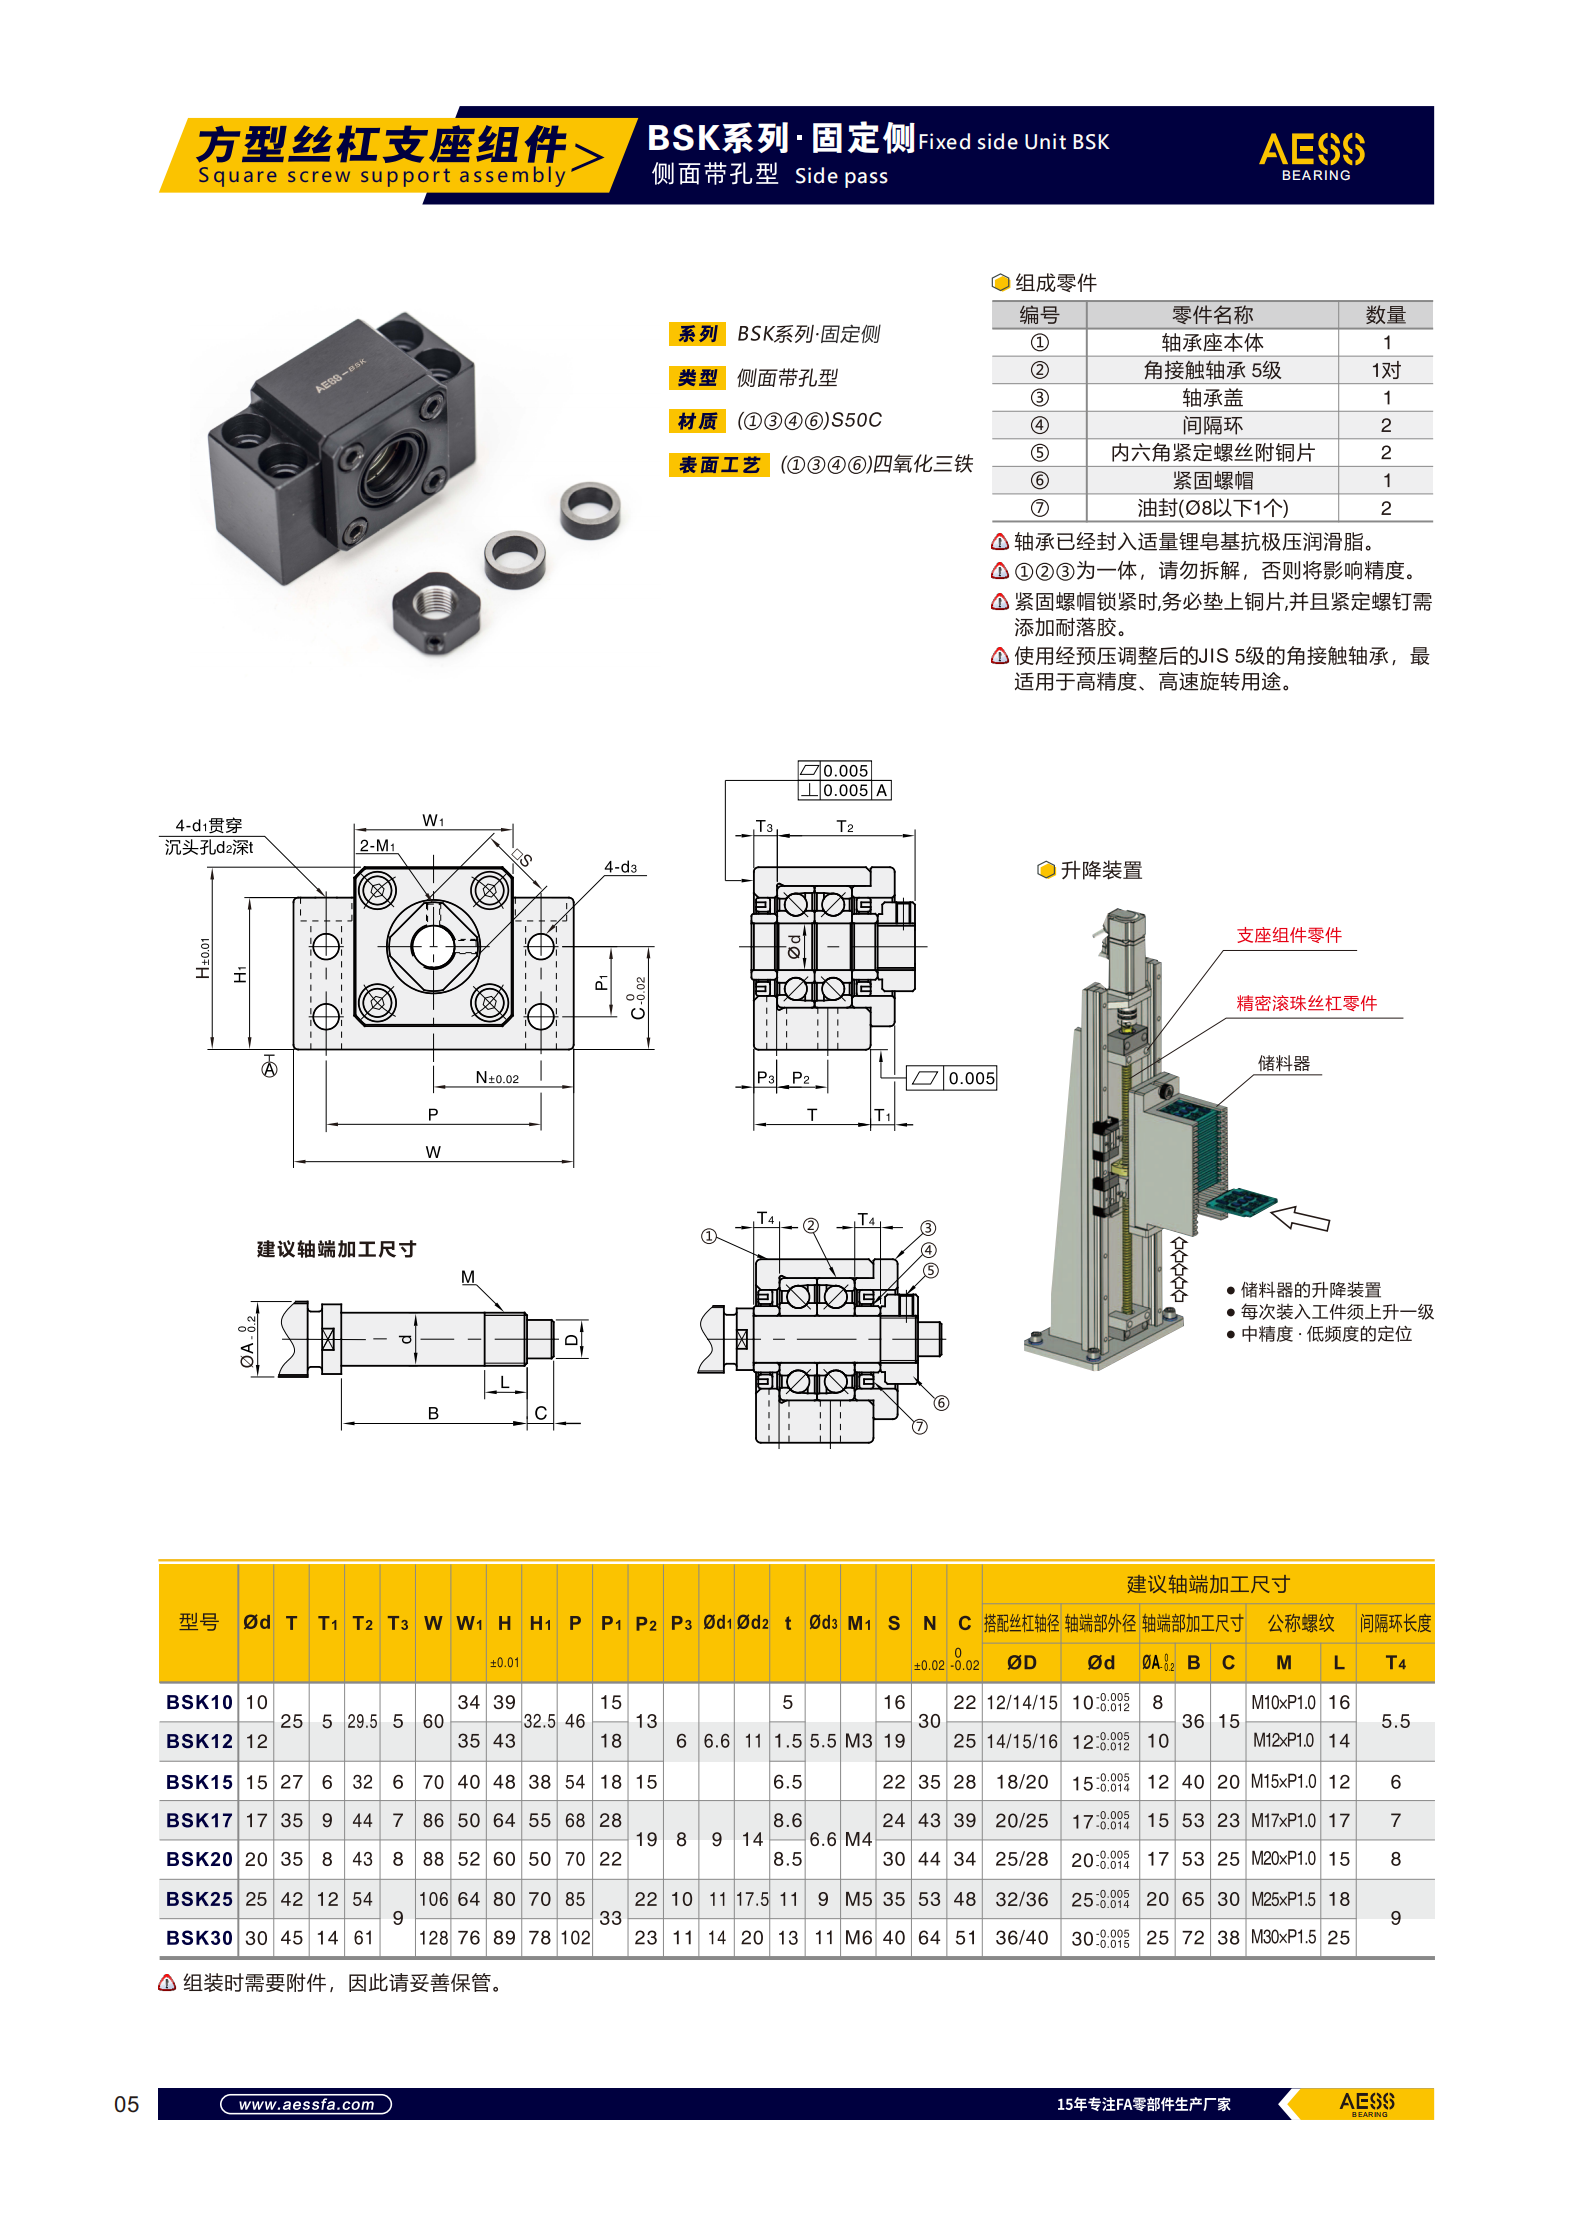 Replacing SYK screw support seat with C-BSW ball screw support seat by Huzhou medical device manufacturer